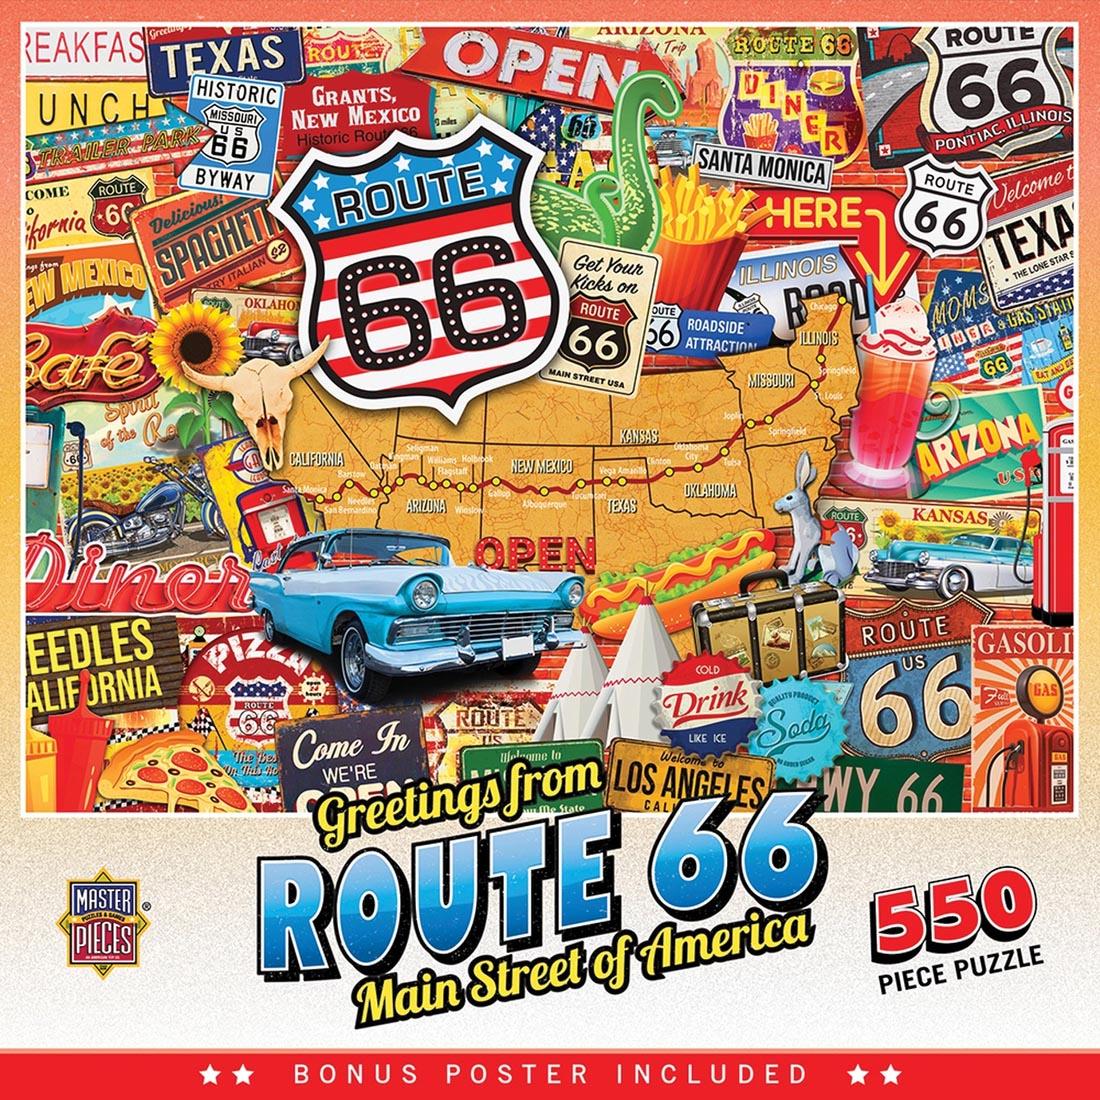 Greetings From Series Route 66 Main Street of America 550-Piece Puzzle by MasterPieces